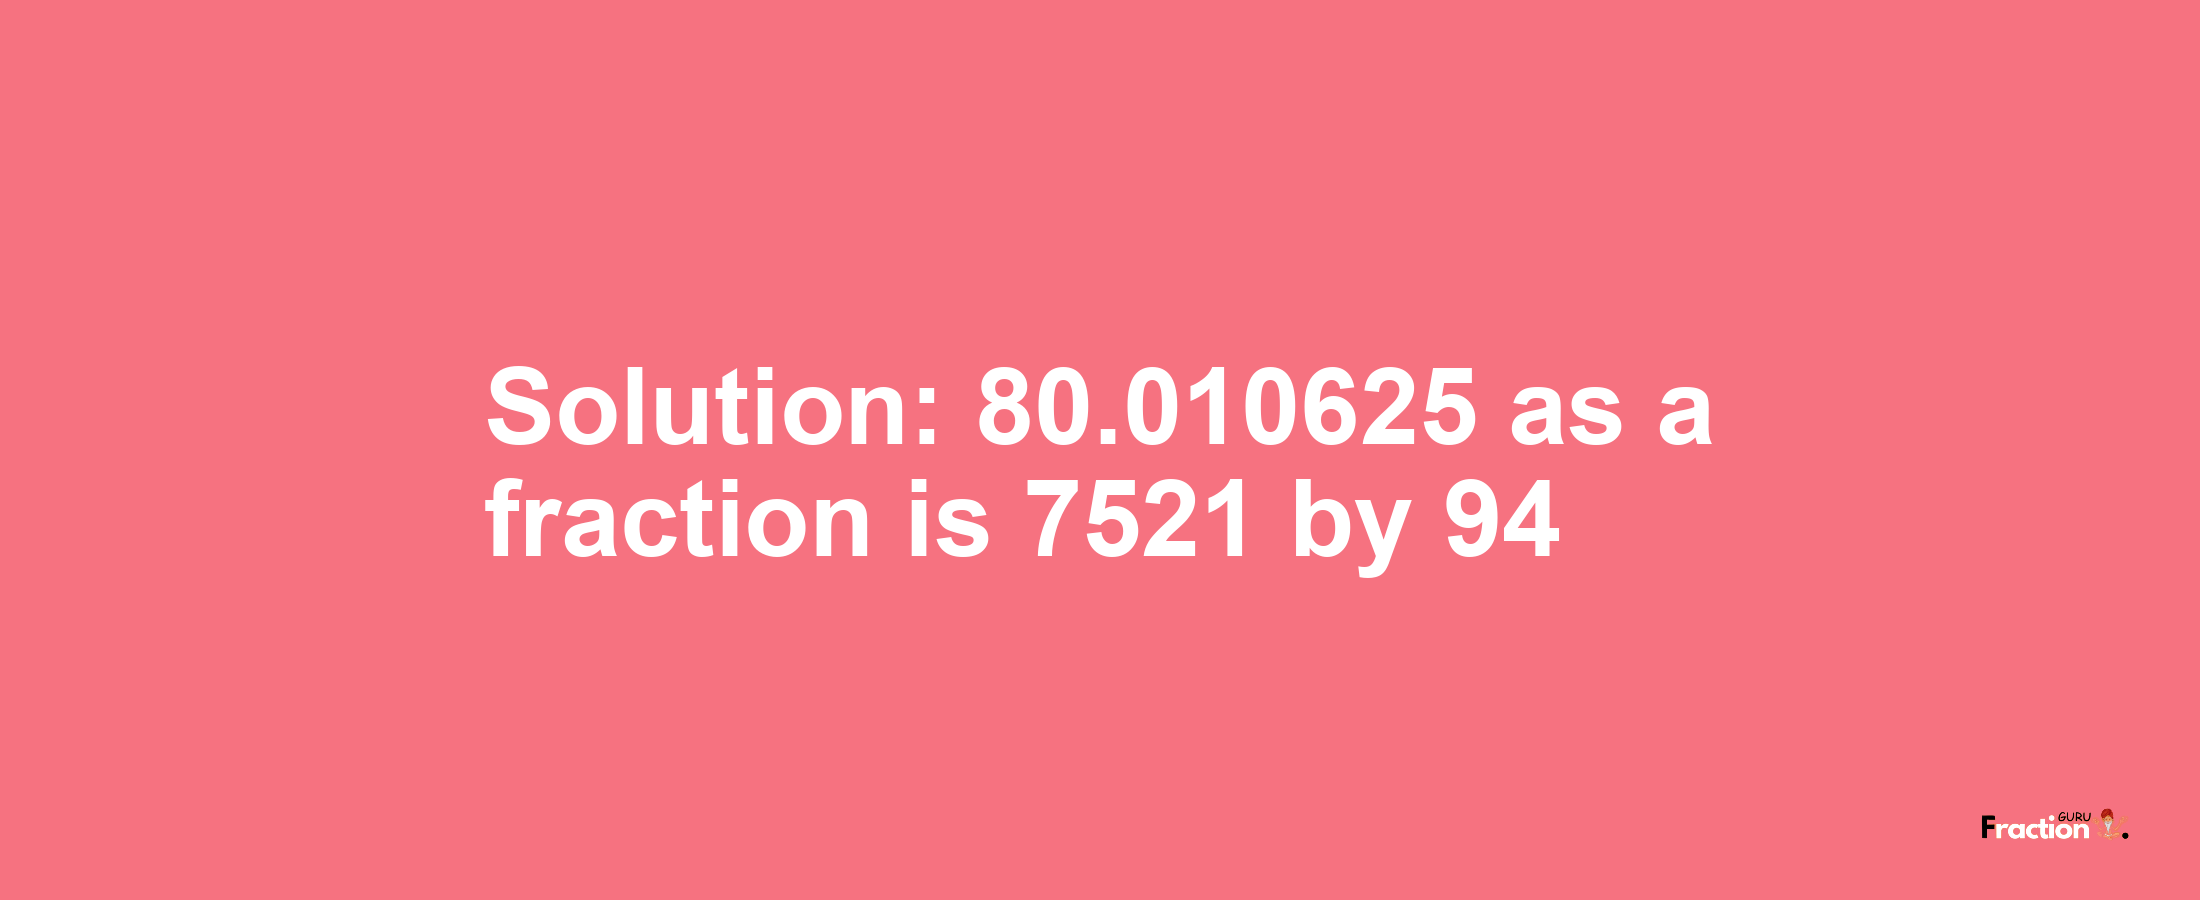 Solution:80.010625 as a fraction is 7521/94